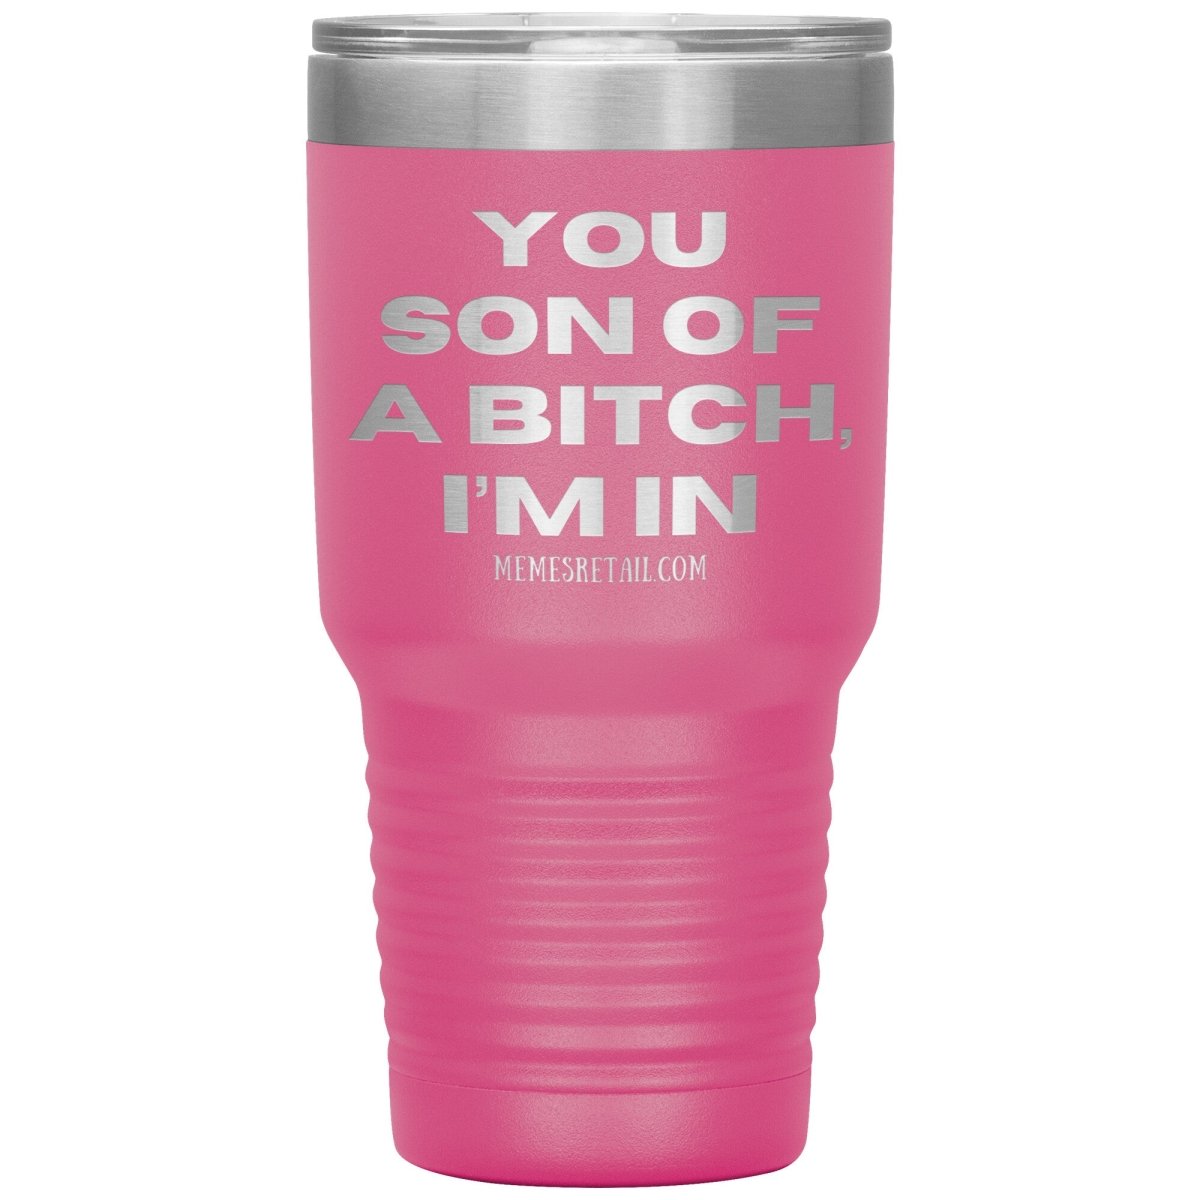 You son of a bitch, I’m in Tumblers, 30oz Insulated Tumbler / Pink - MemesRetail.com